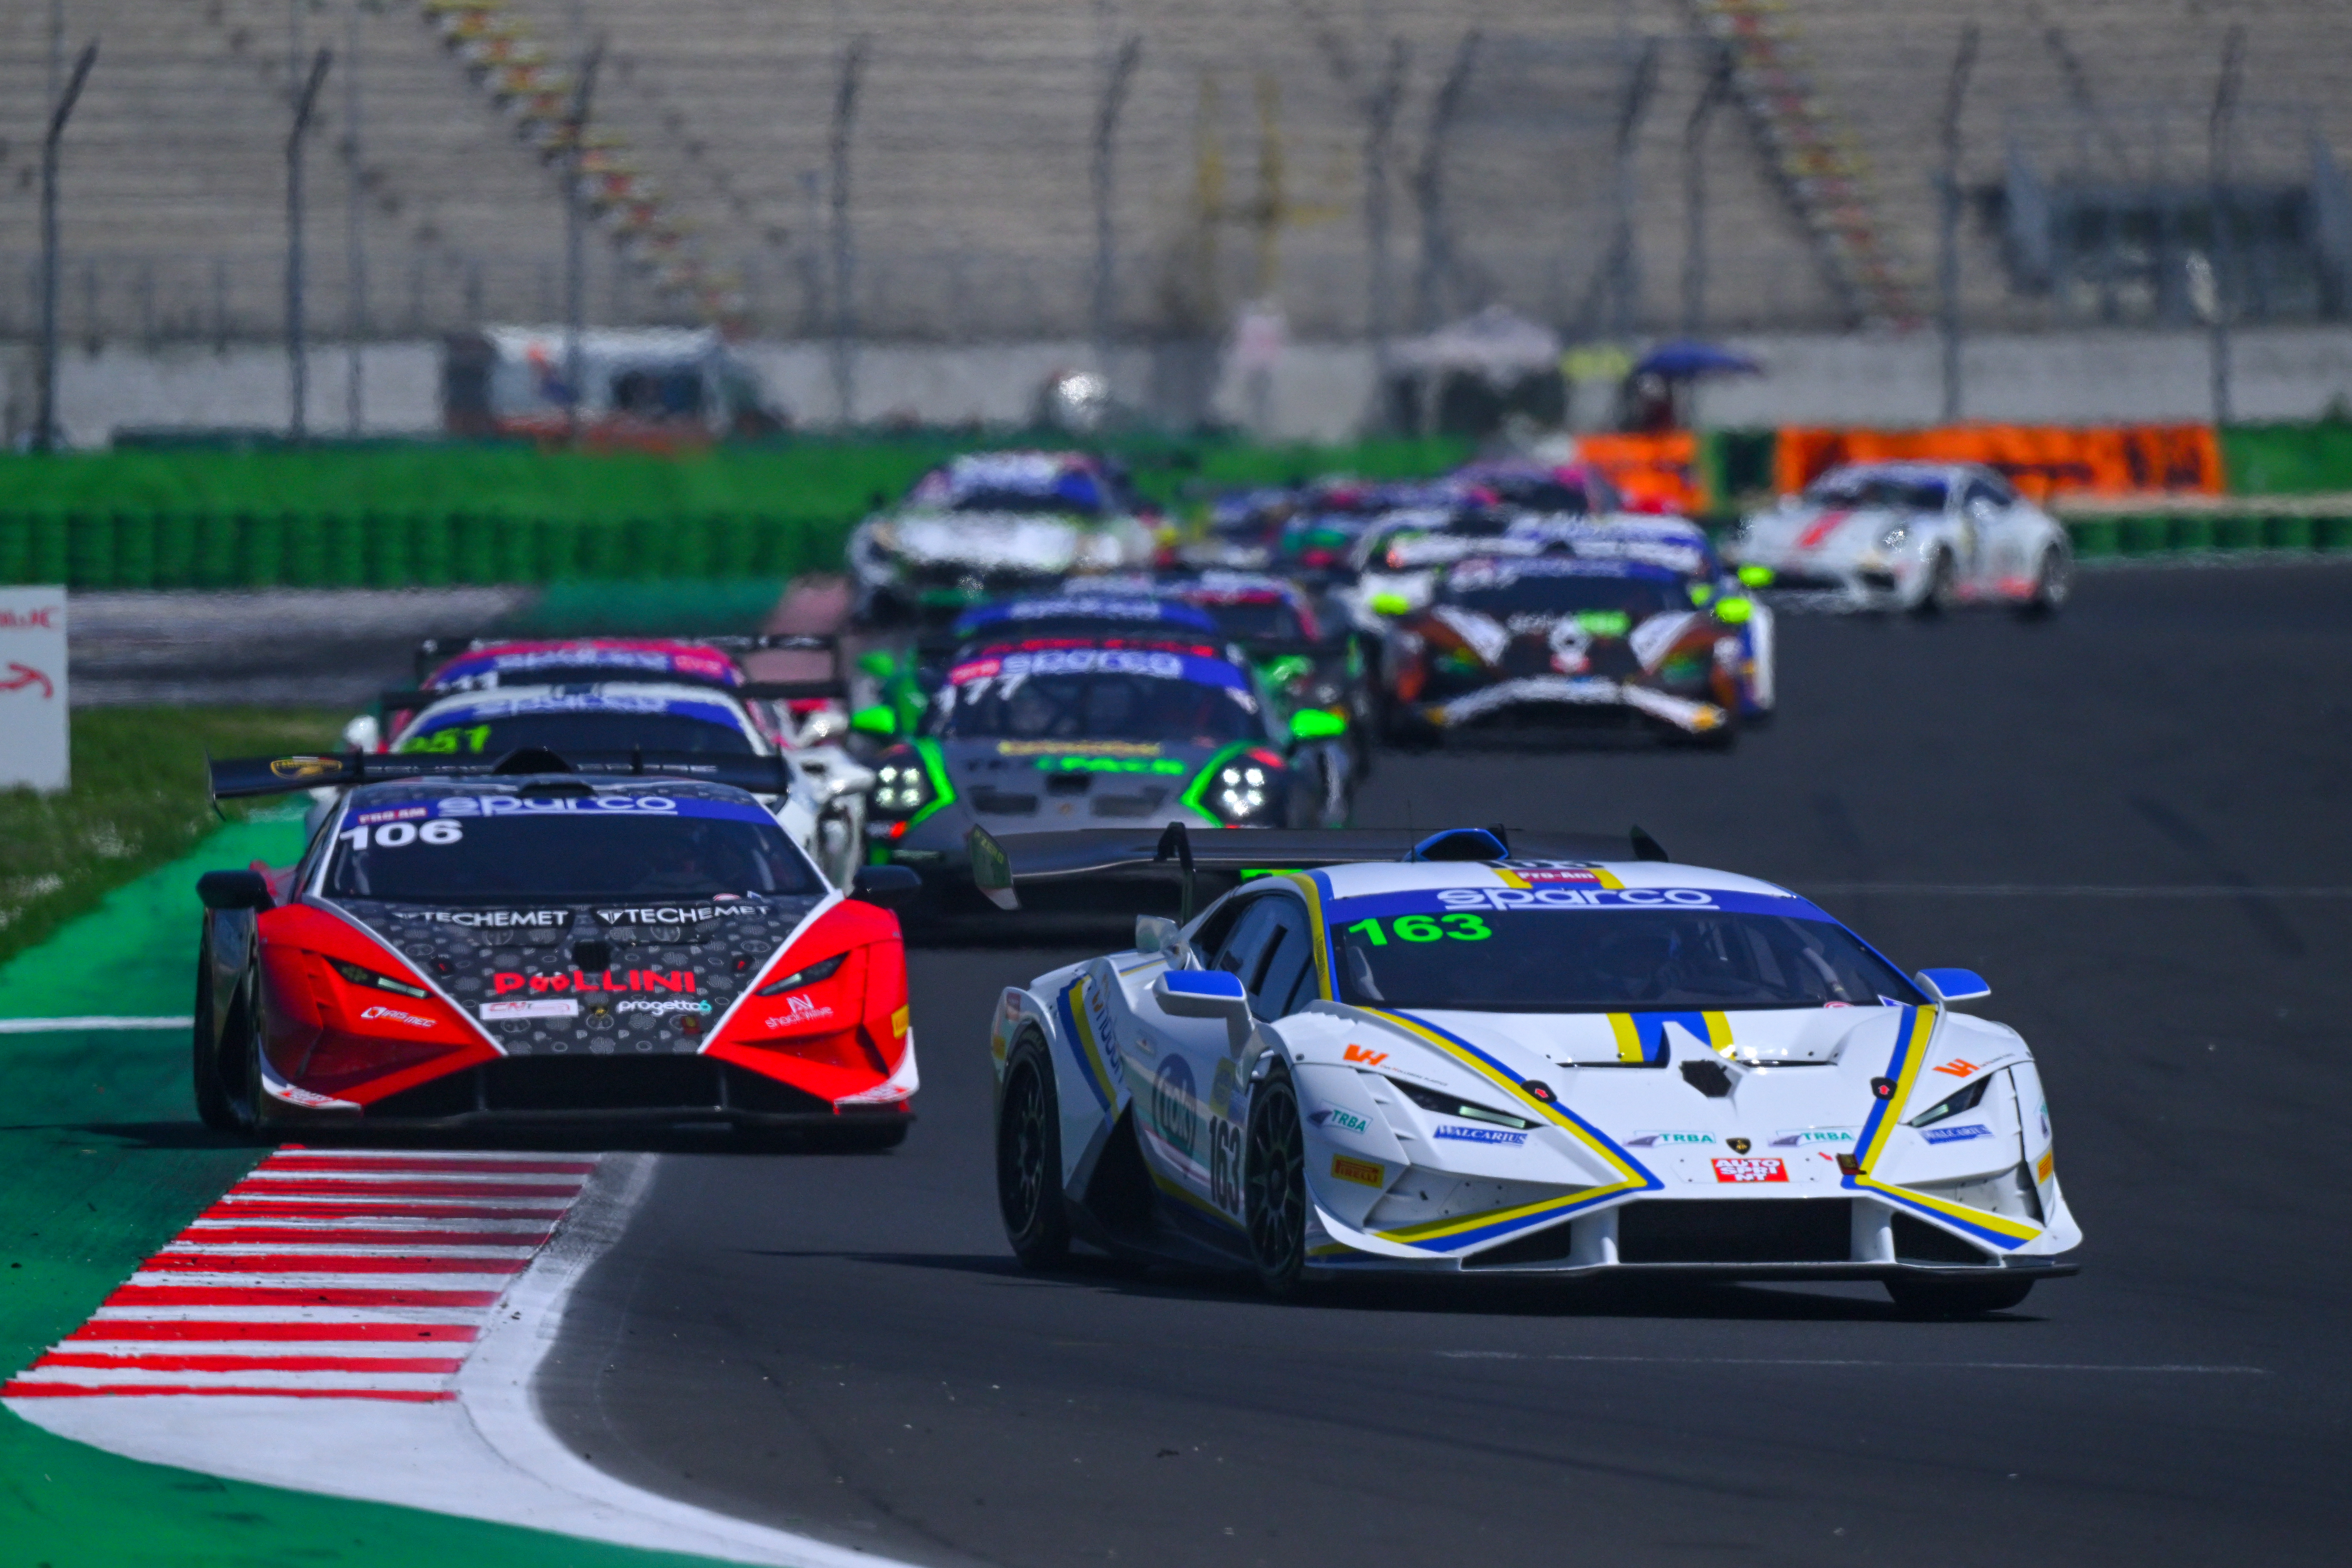 VICTORIES AND PODIUMS GALORE FOR VSR IN ITALIAN GT SPRINT SEASON OPENER